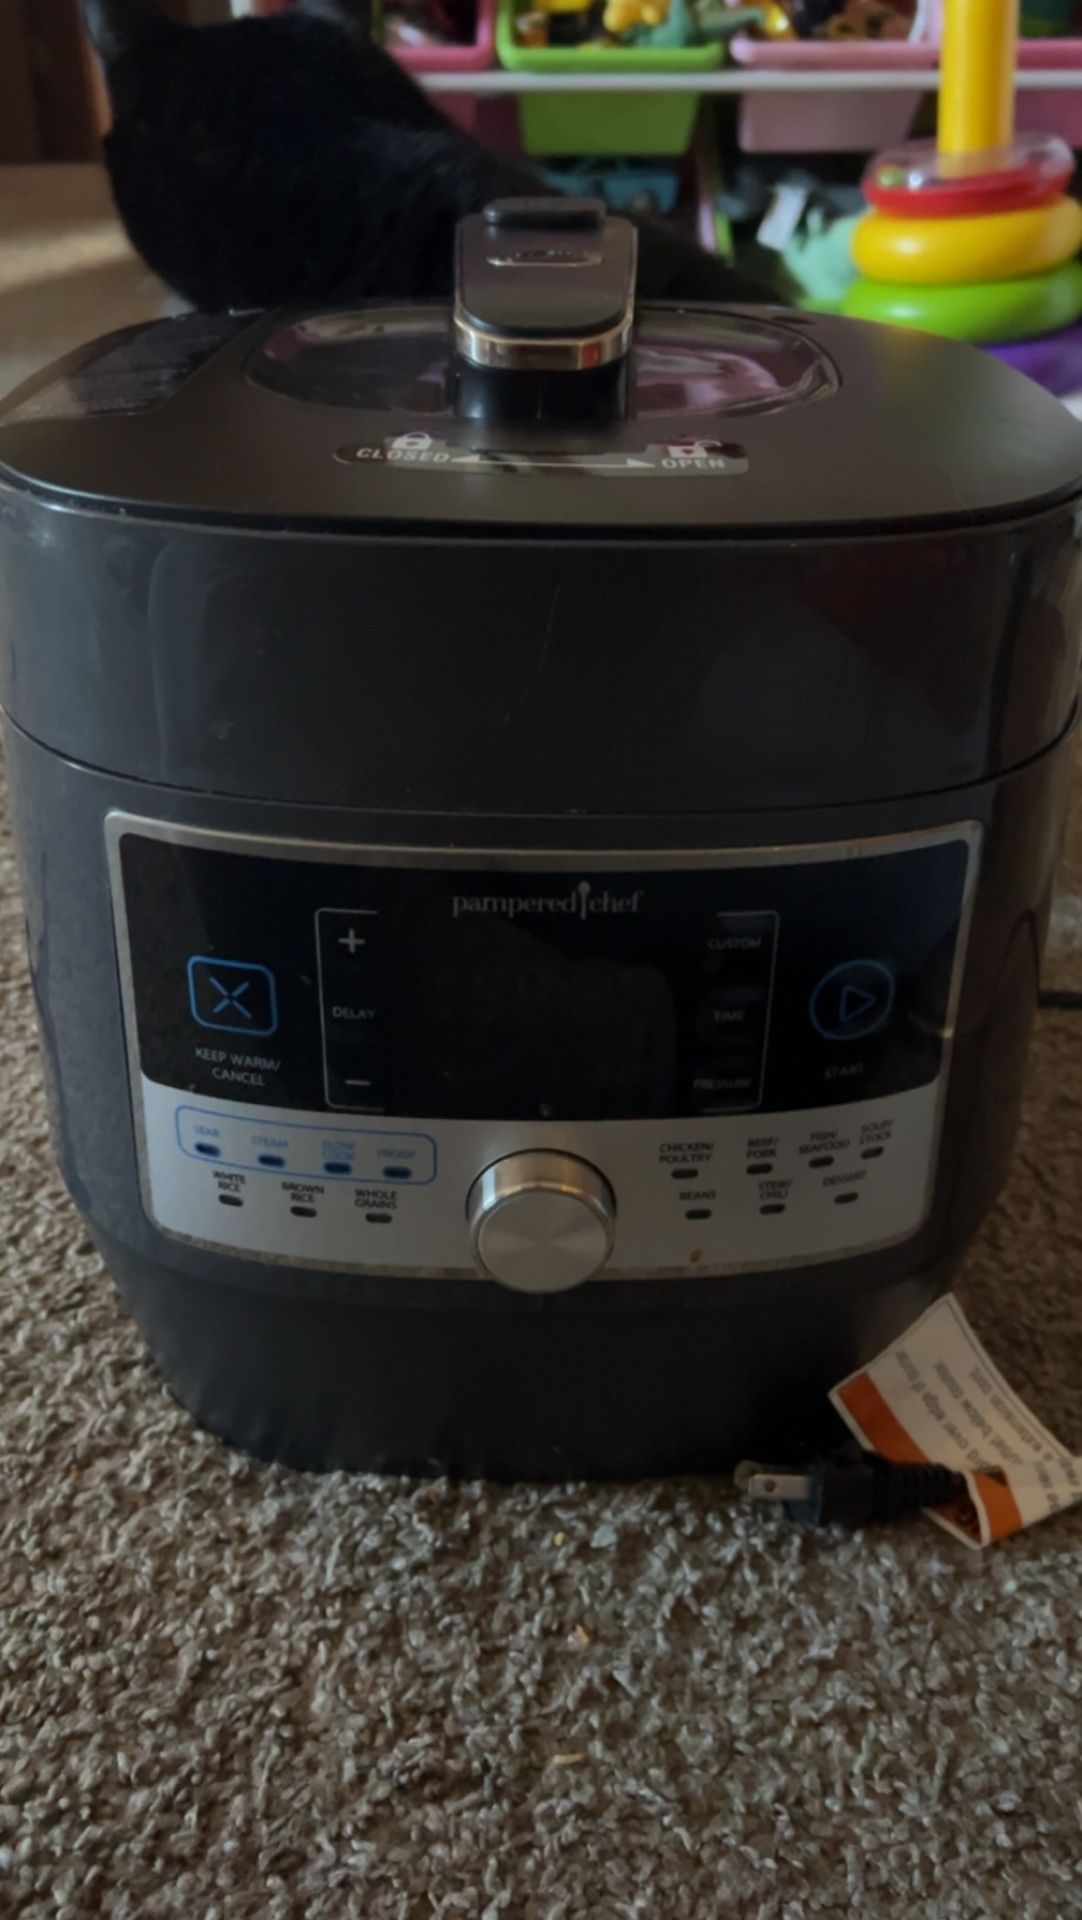 Pampered Chef Pressure Cooker